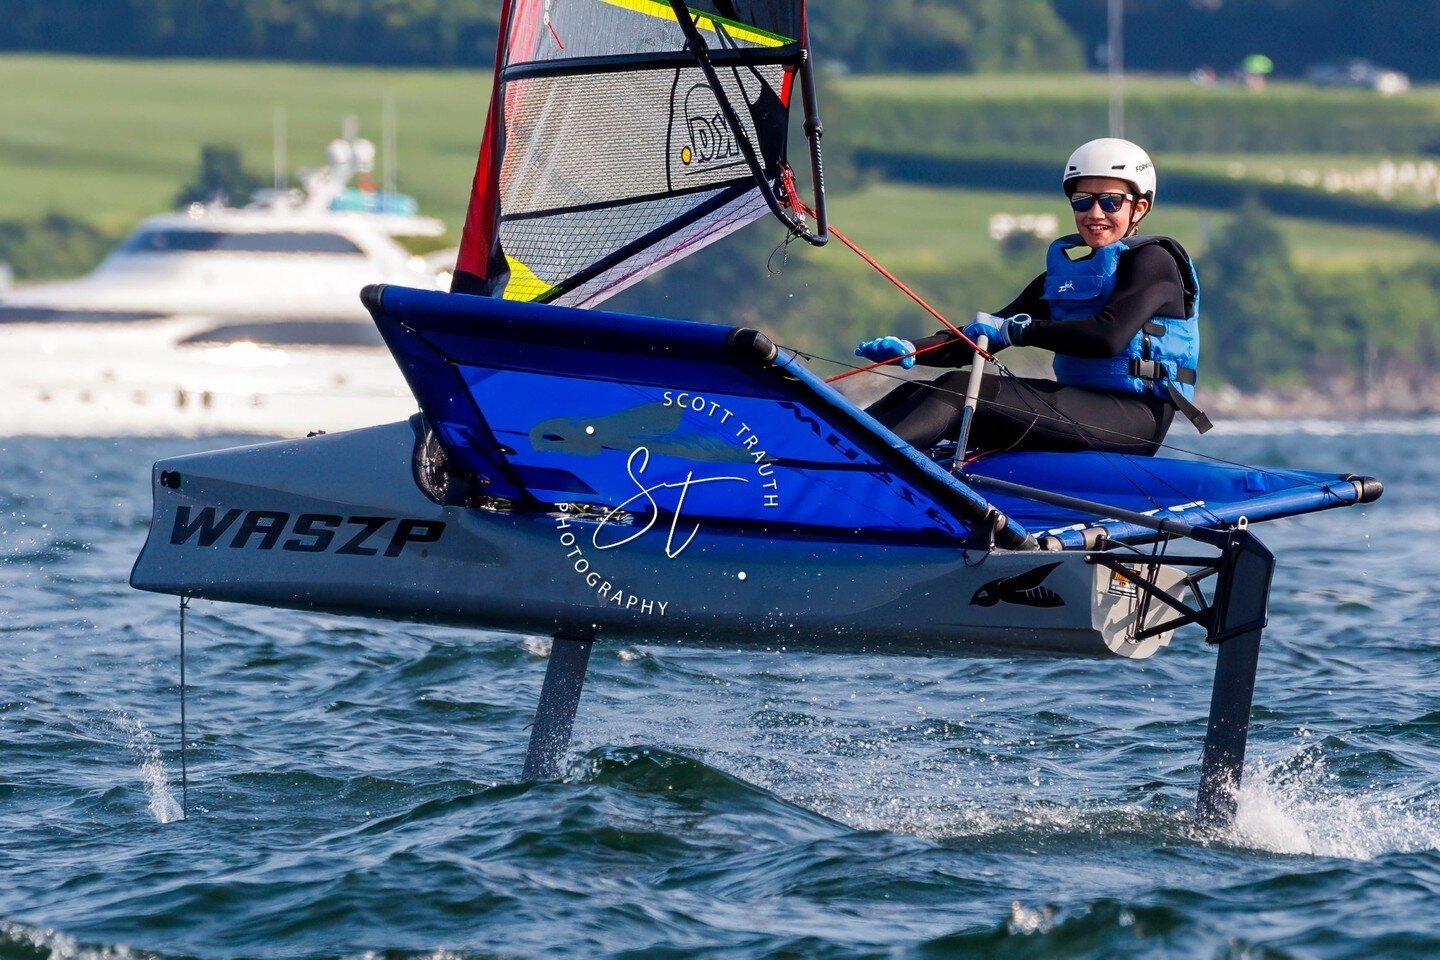 #waszpwednesday
Great to see these two #waszp sailors last evening on #narragansettbay 
Pictured are @norris_brookes and @leo_burnham
#waszpsailing #waszpfoiling @waszpusa 
#foilingintothefuture #newportri #jamestownri
#flyby #sailing #sailinglife